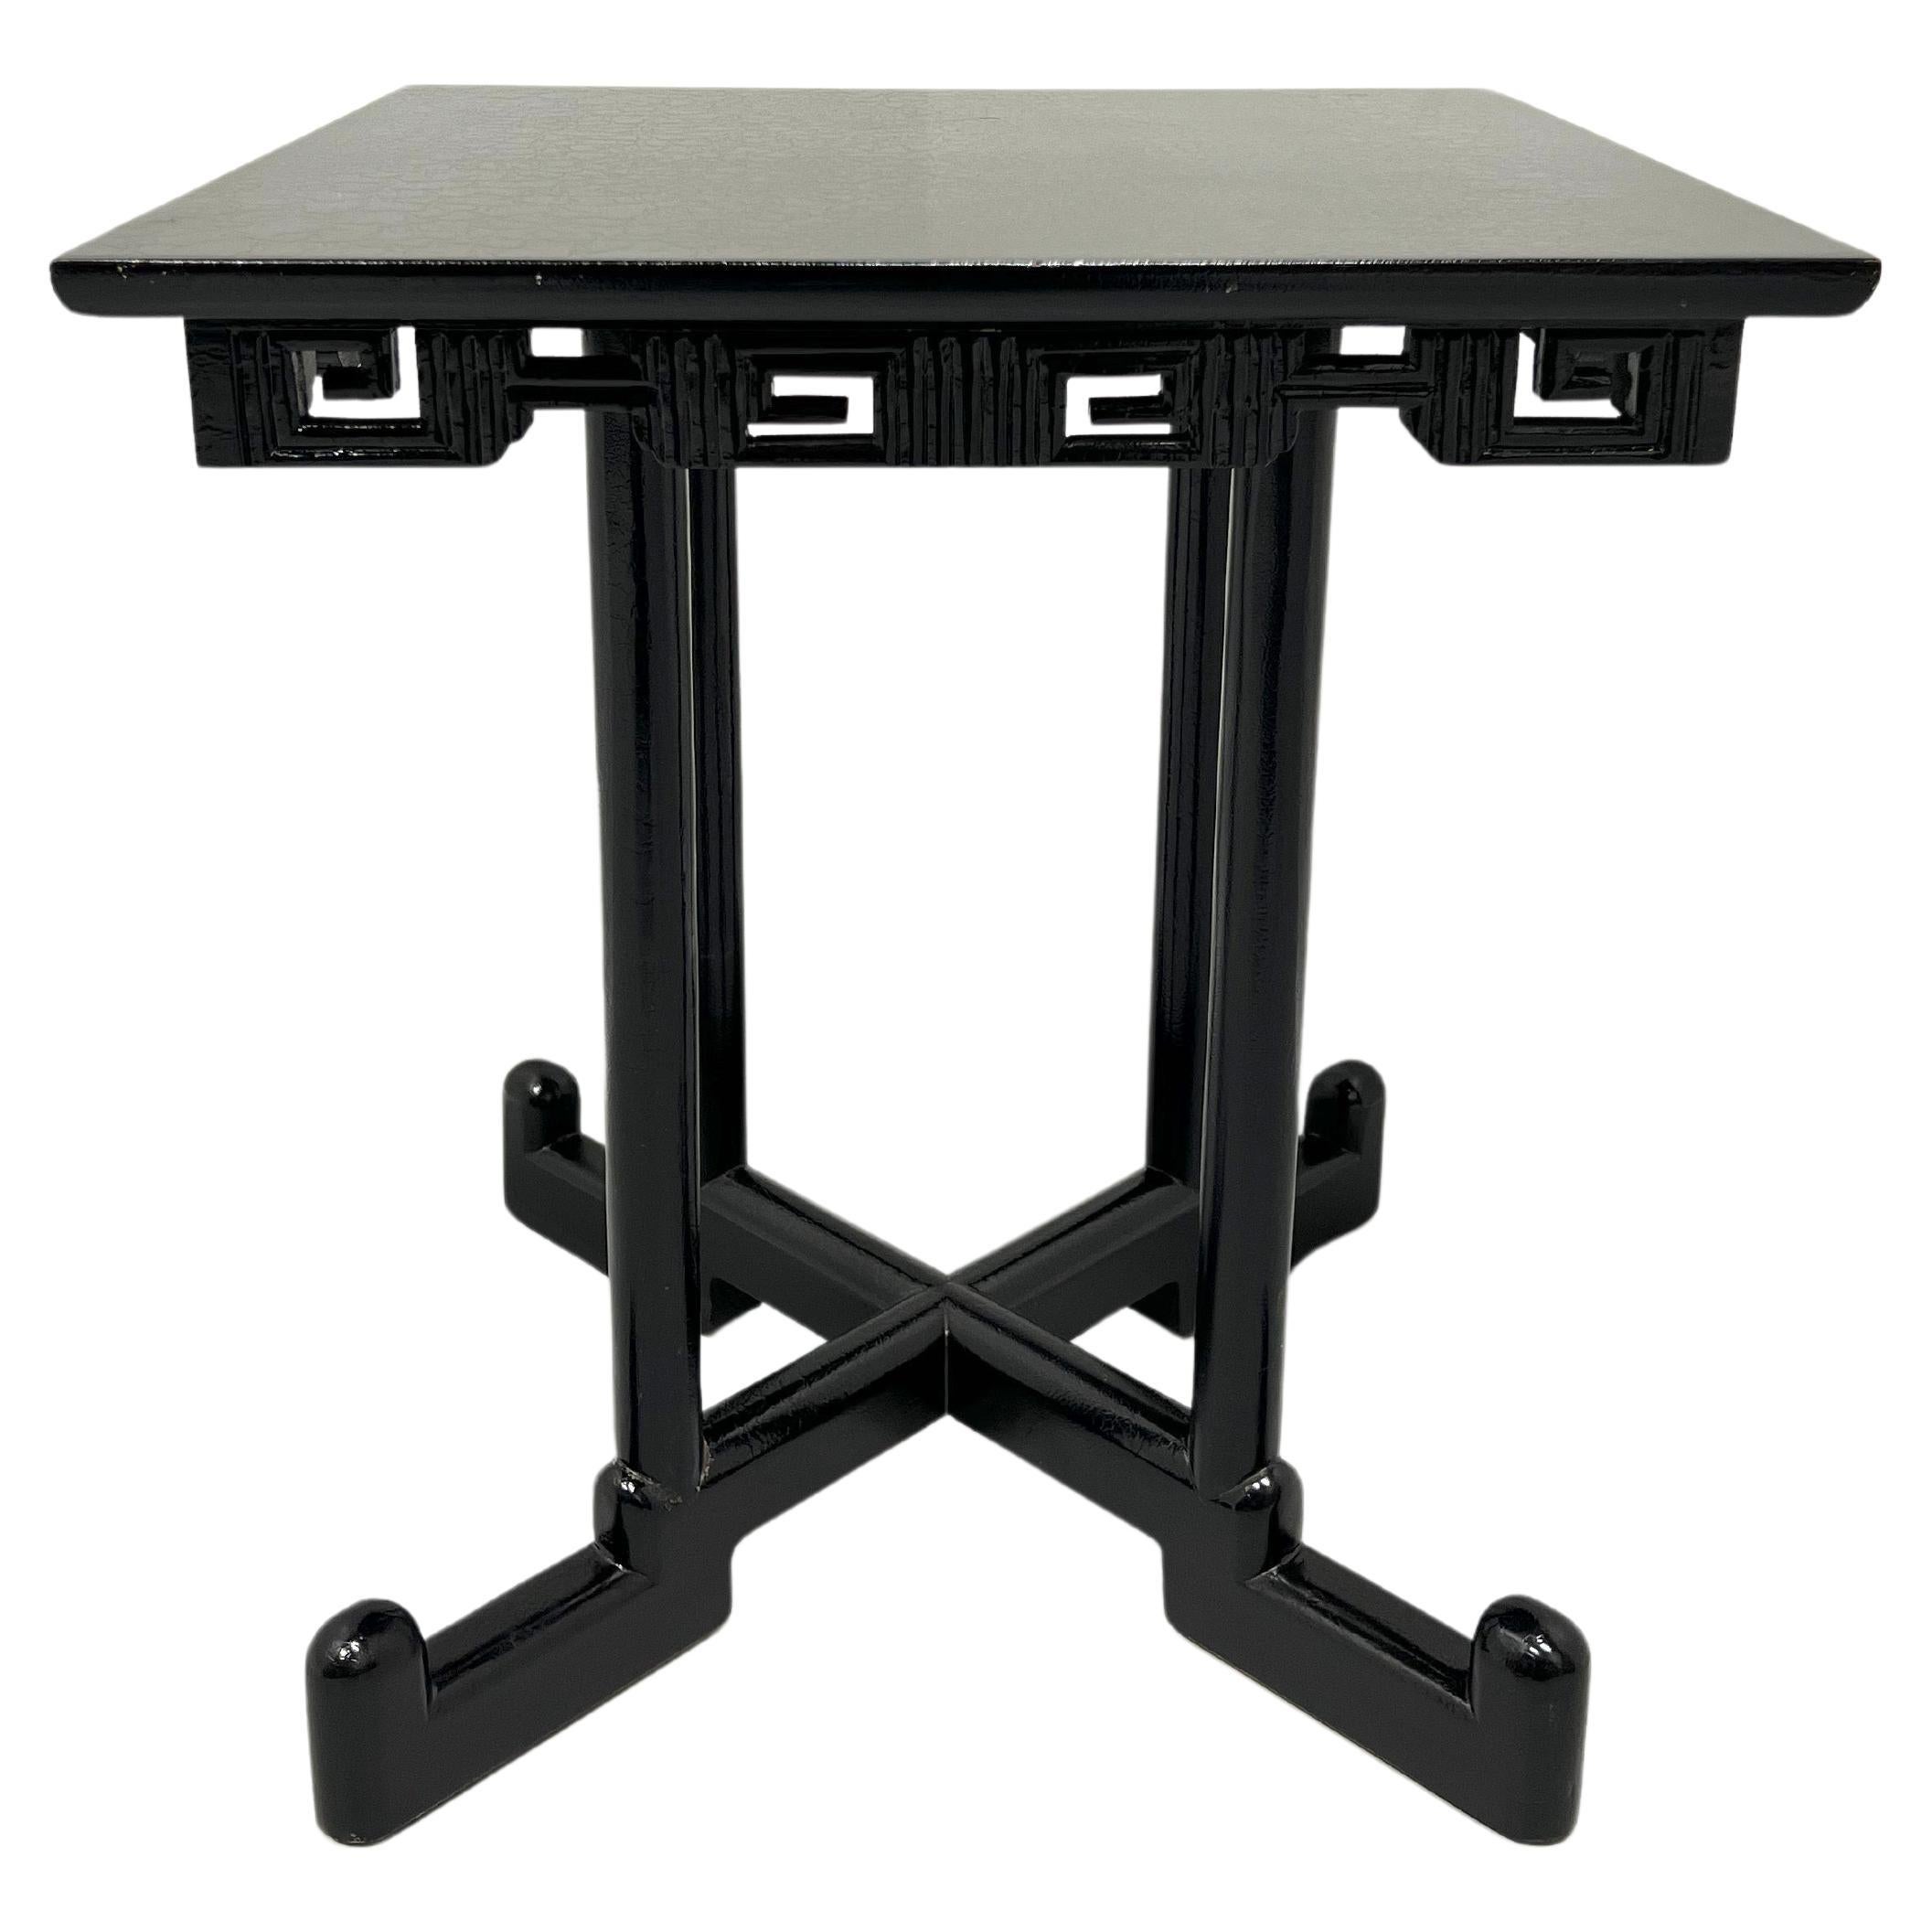 1980's Black Crackle Finish Asian Style Square Accent Table For Sale